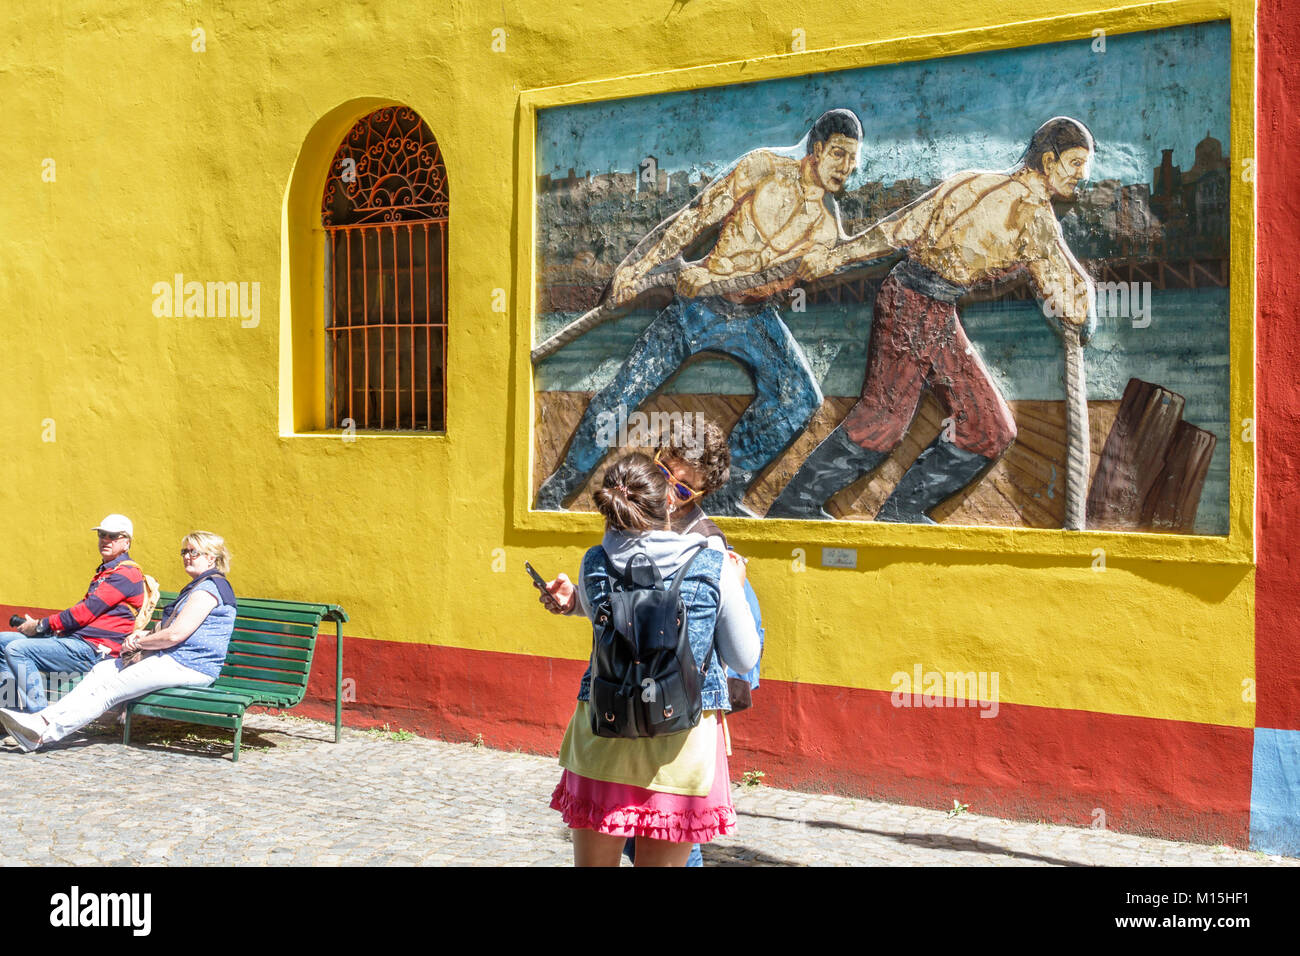 Buenos Aires Argentina,Caminito Barrio de la Boca,street museum,immigrant neighborhood,brightly painted buildings,sculpture,relief,adult adults man me Stock Photo